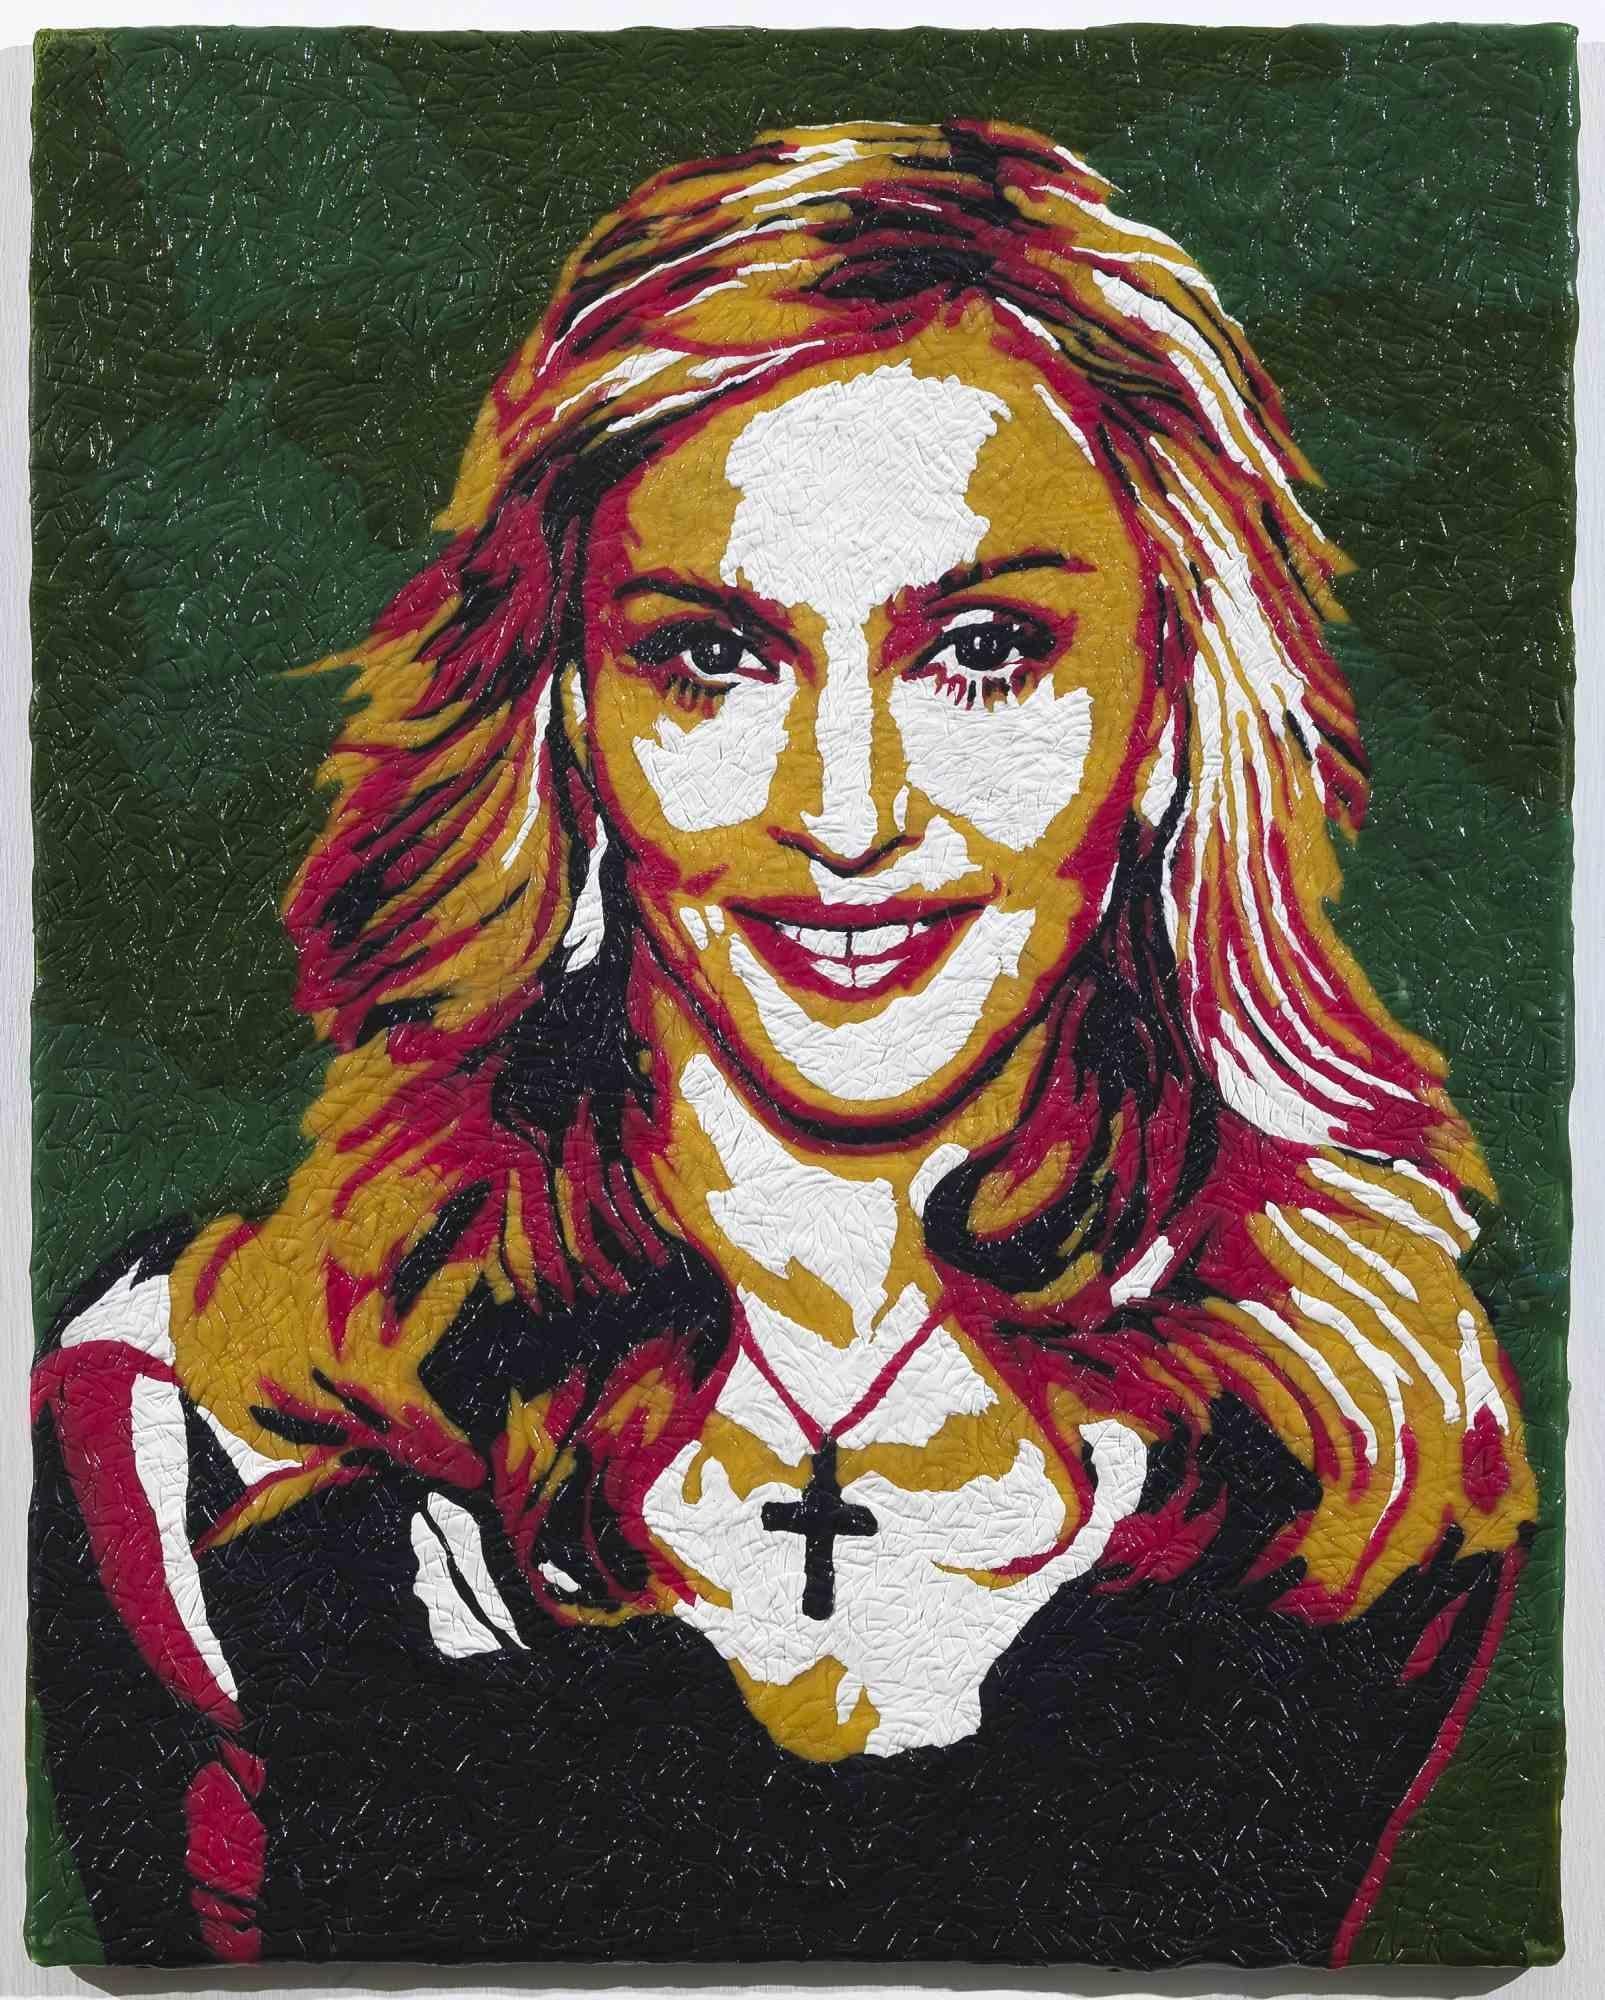 Madonna is an original Contemporary Arwork realized by the Italian artist Maurizio Savini (b. Rome, 1962) in 2014. 

Original Encaustic of chewing gum on board. 

Hand-signed by the artist on the back.

The Certificate of Authenticity is provided by